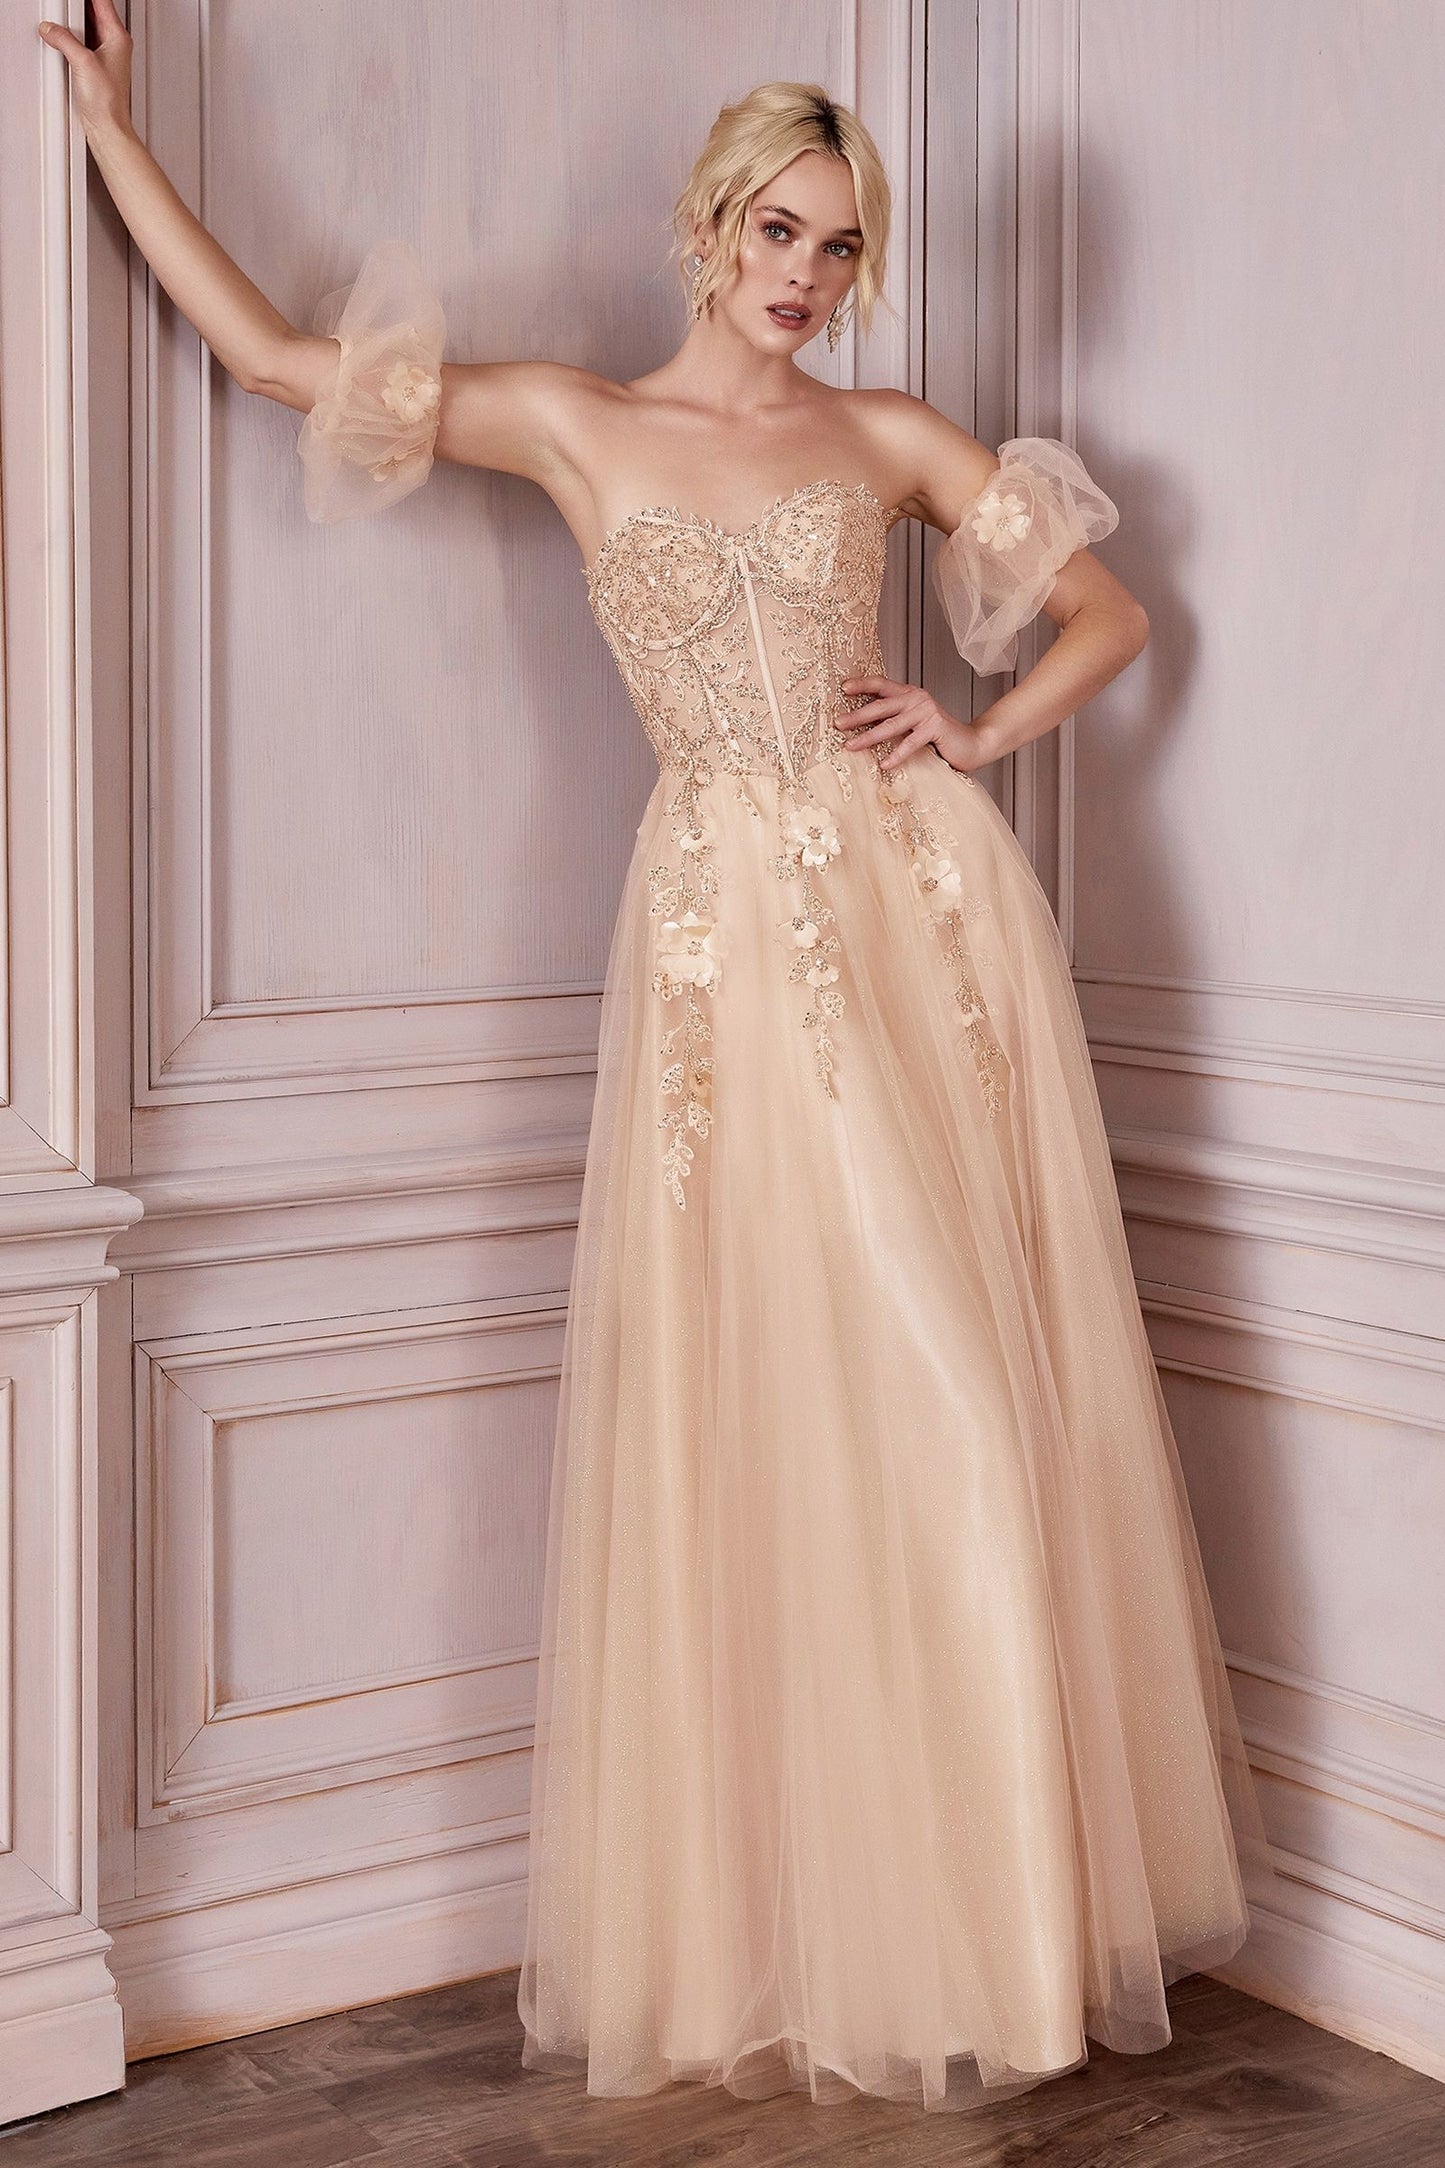 Strapless Layered Tulle Gown